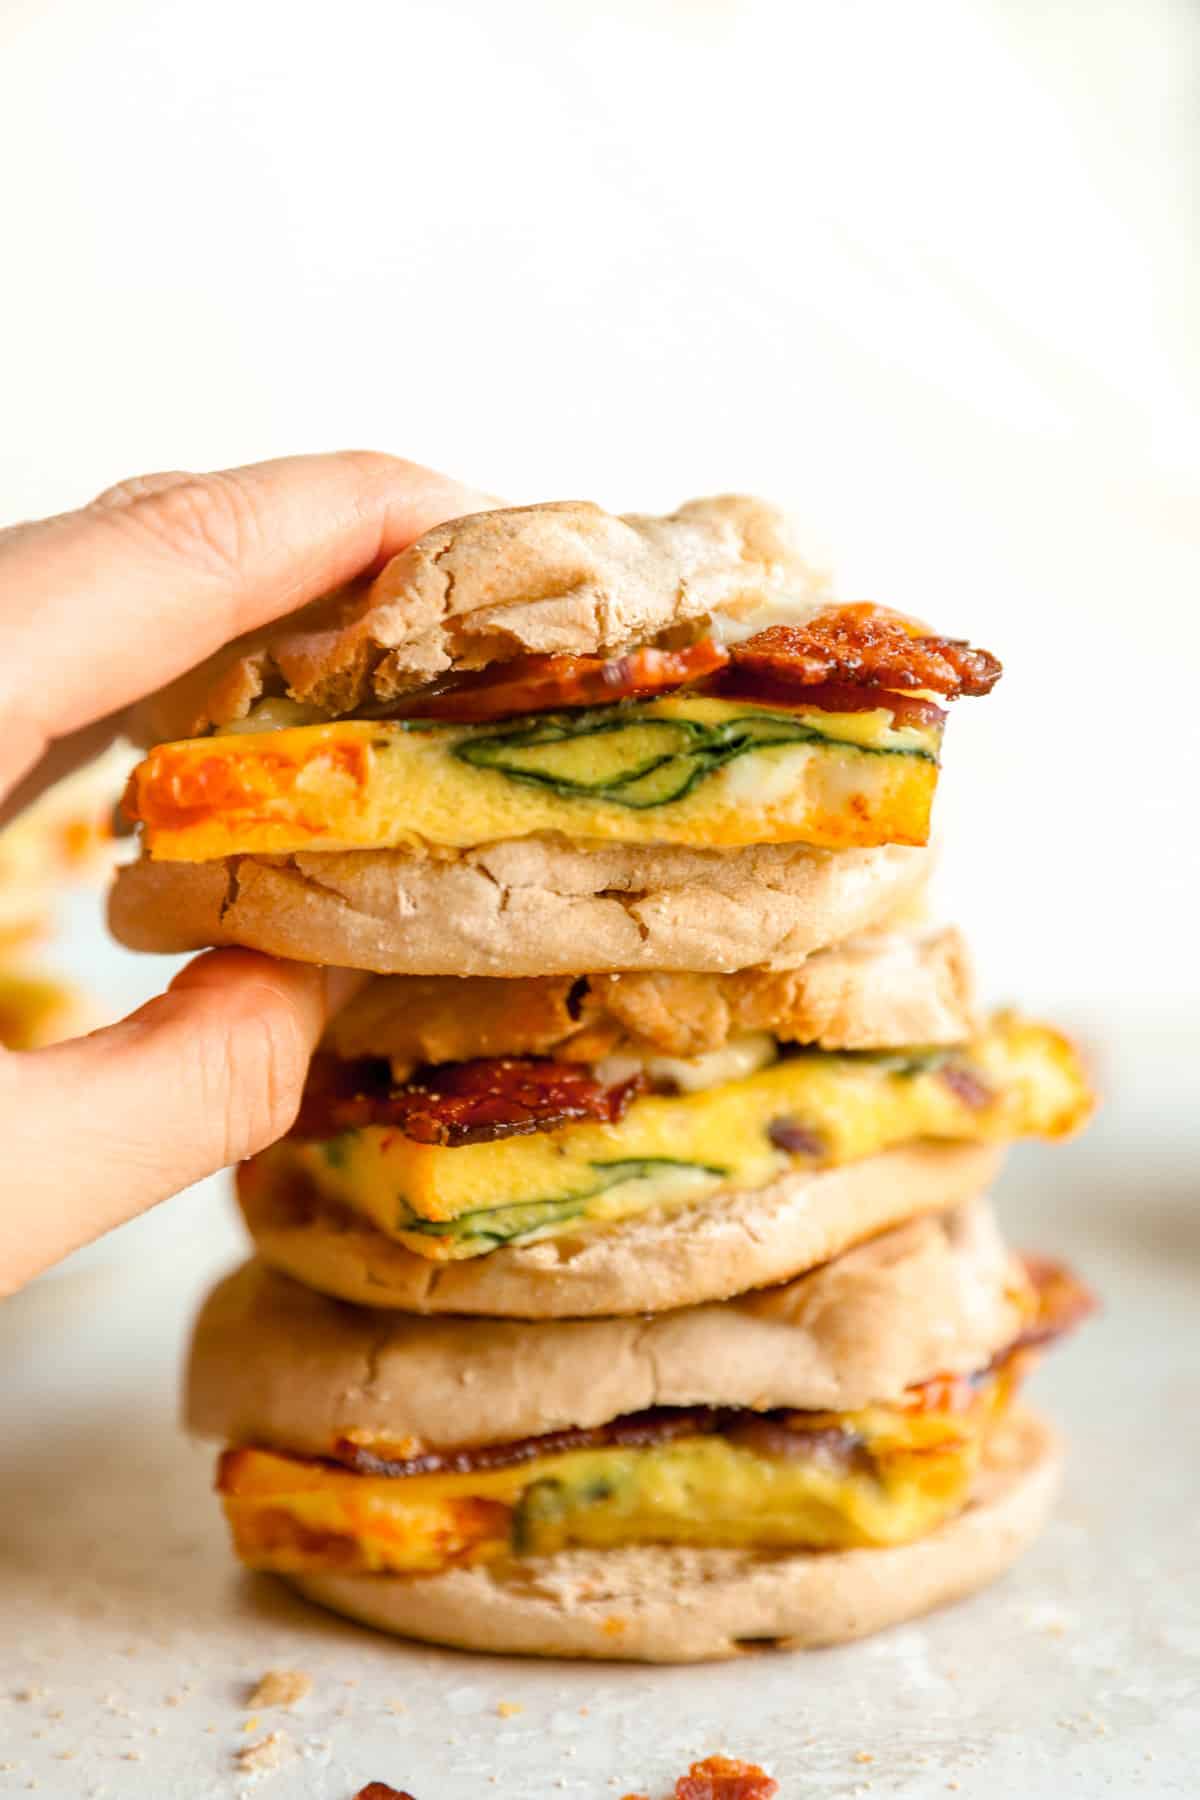 one breakfast egg sandwich being lifted off a pile of three.